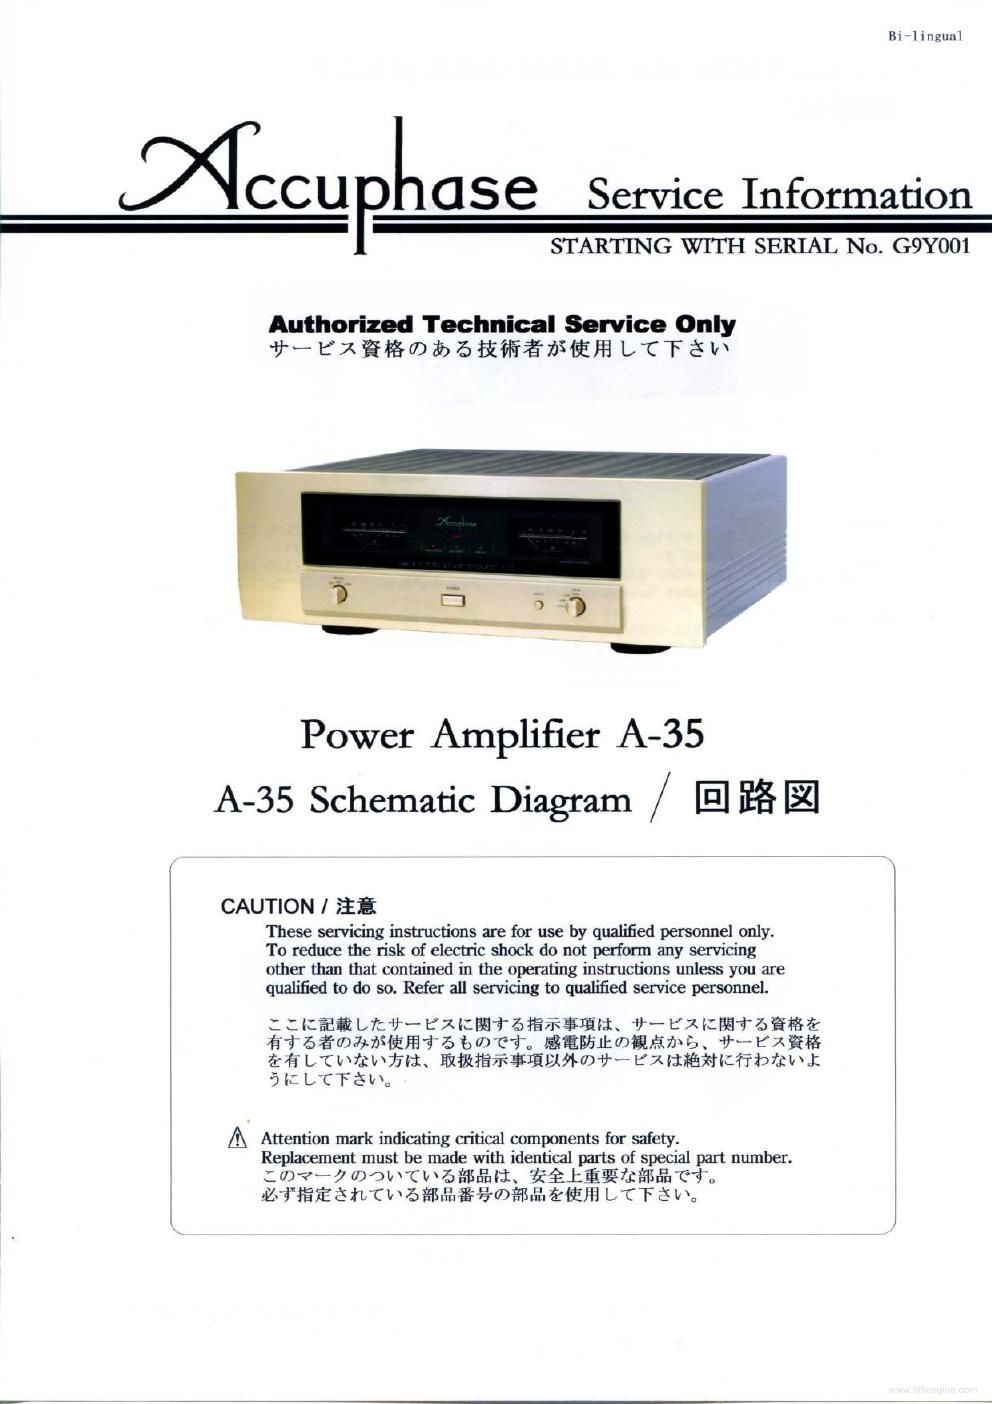 accuphase a35 servicemanual